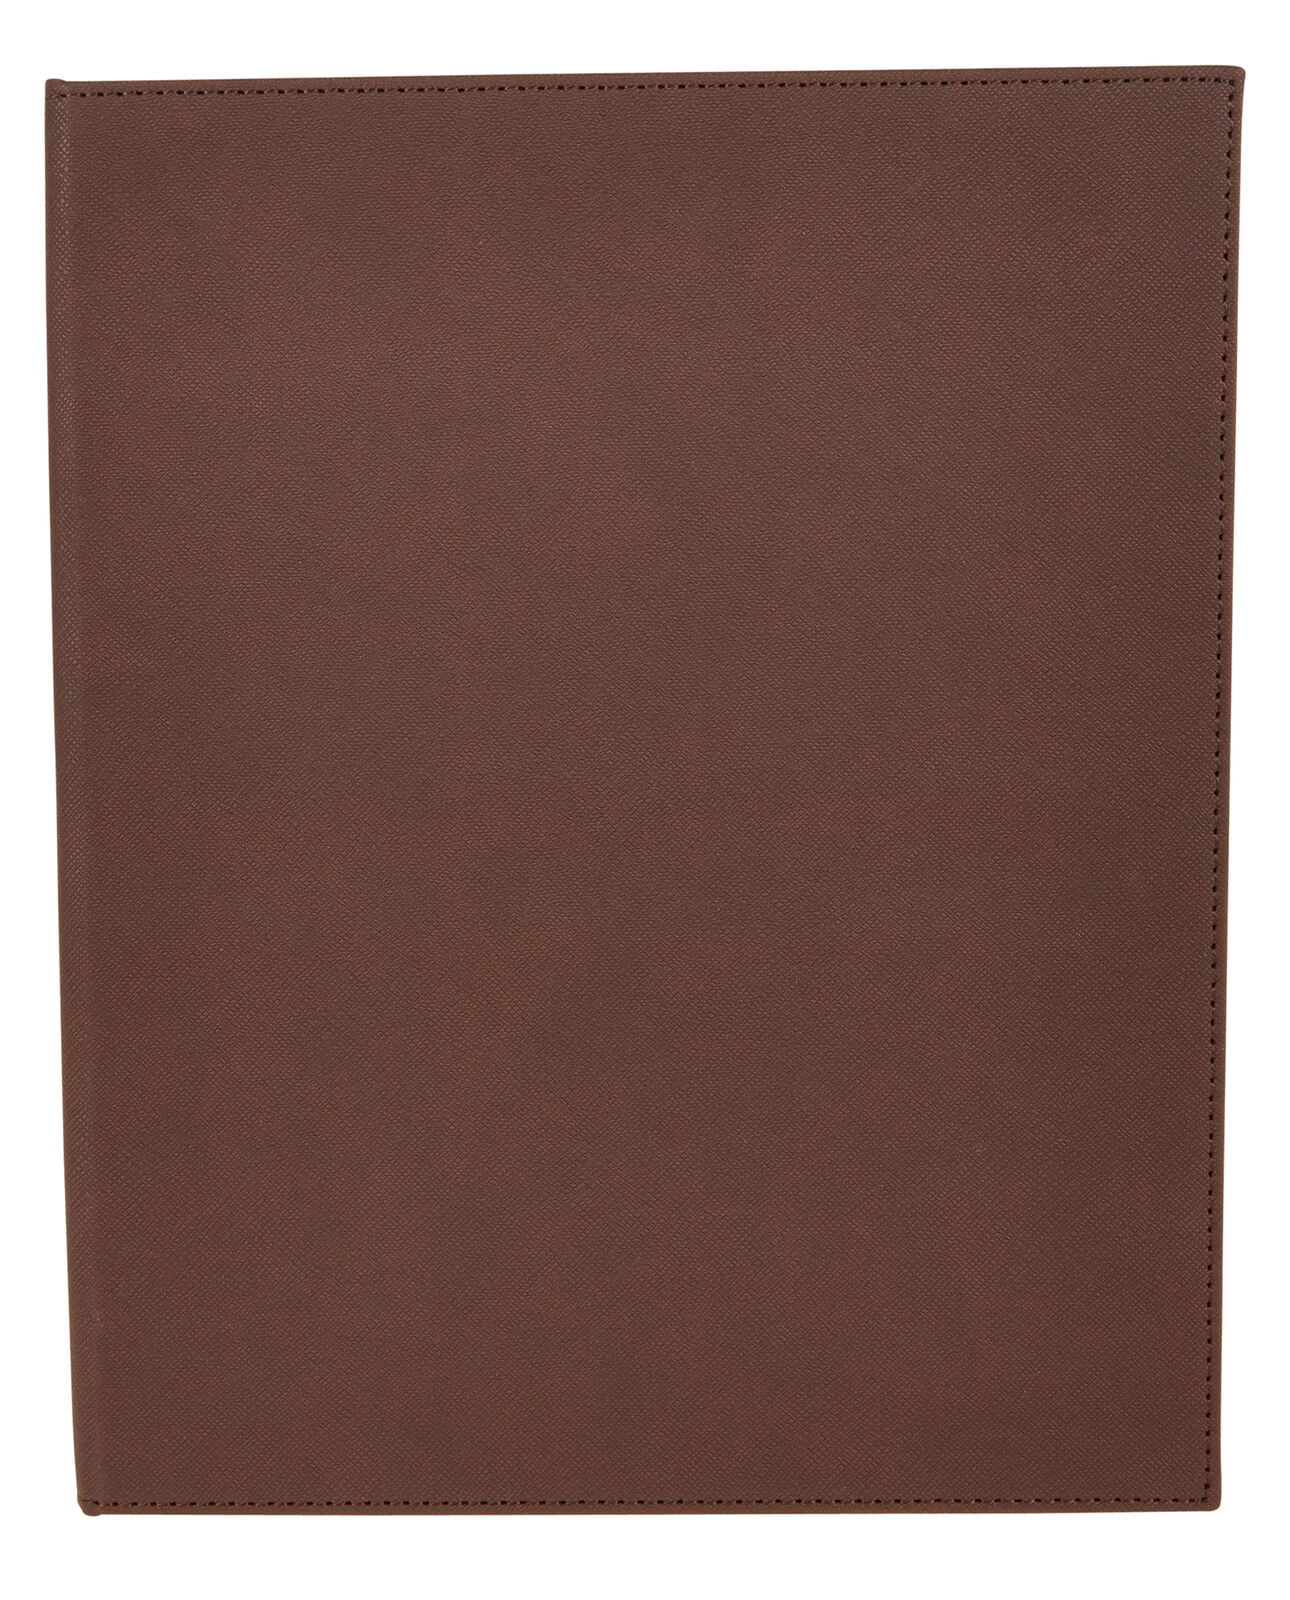 Winco LMD-811GY Gray Two-Views Menu Cover for 8.5x11-Inch Insets 